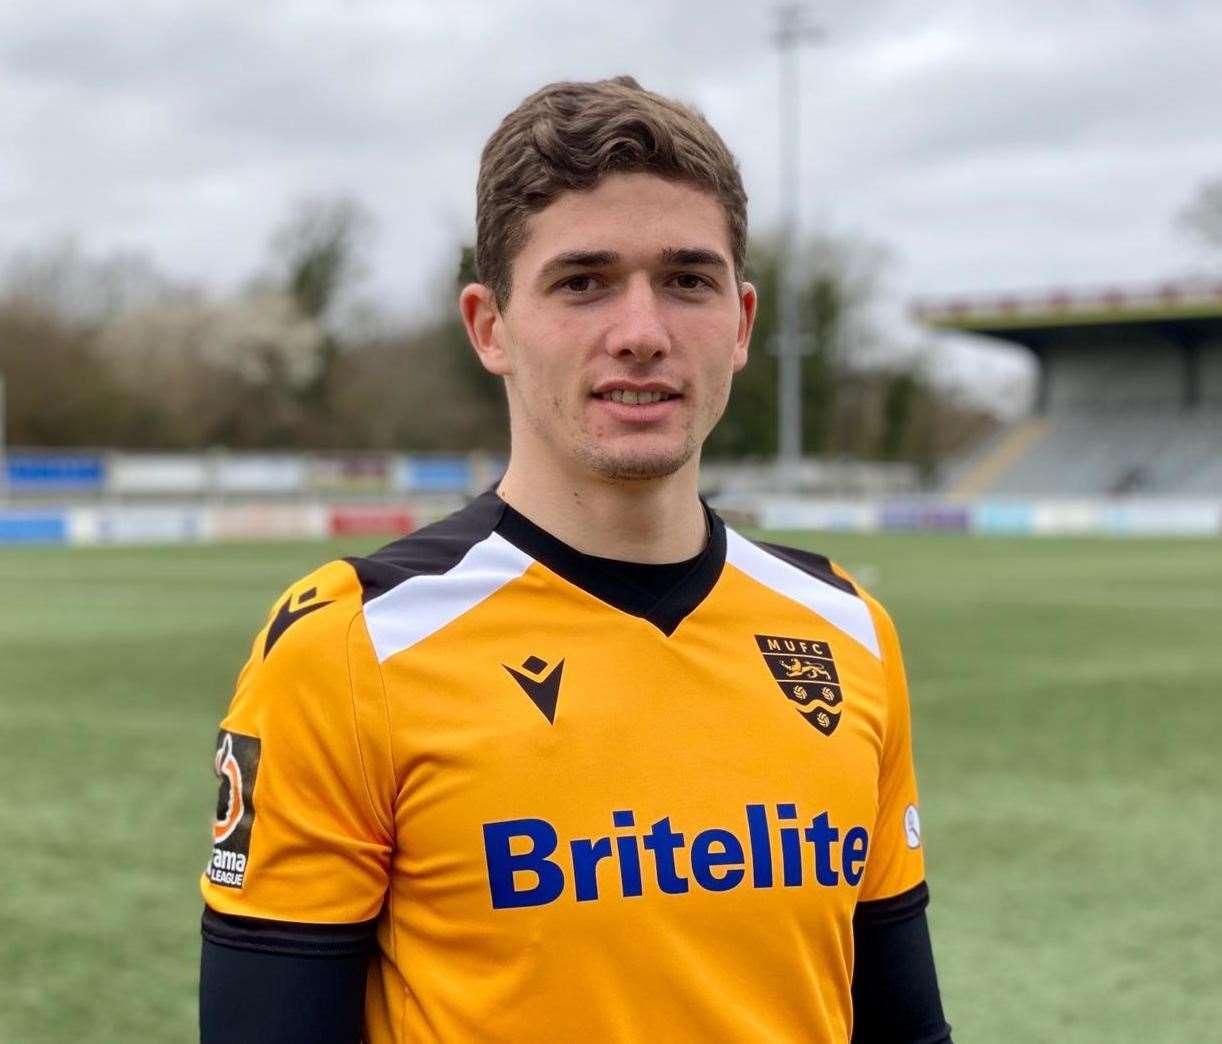 Former Maidstone striker Max Watters has joined Cardiff City